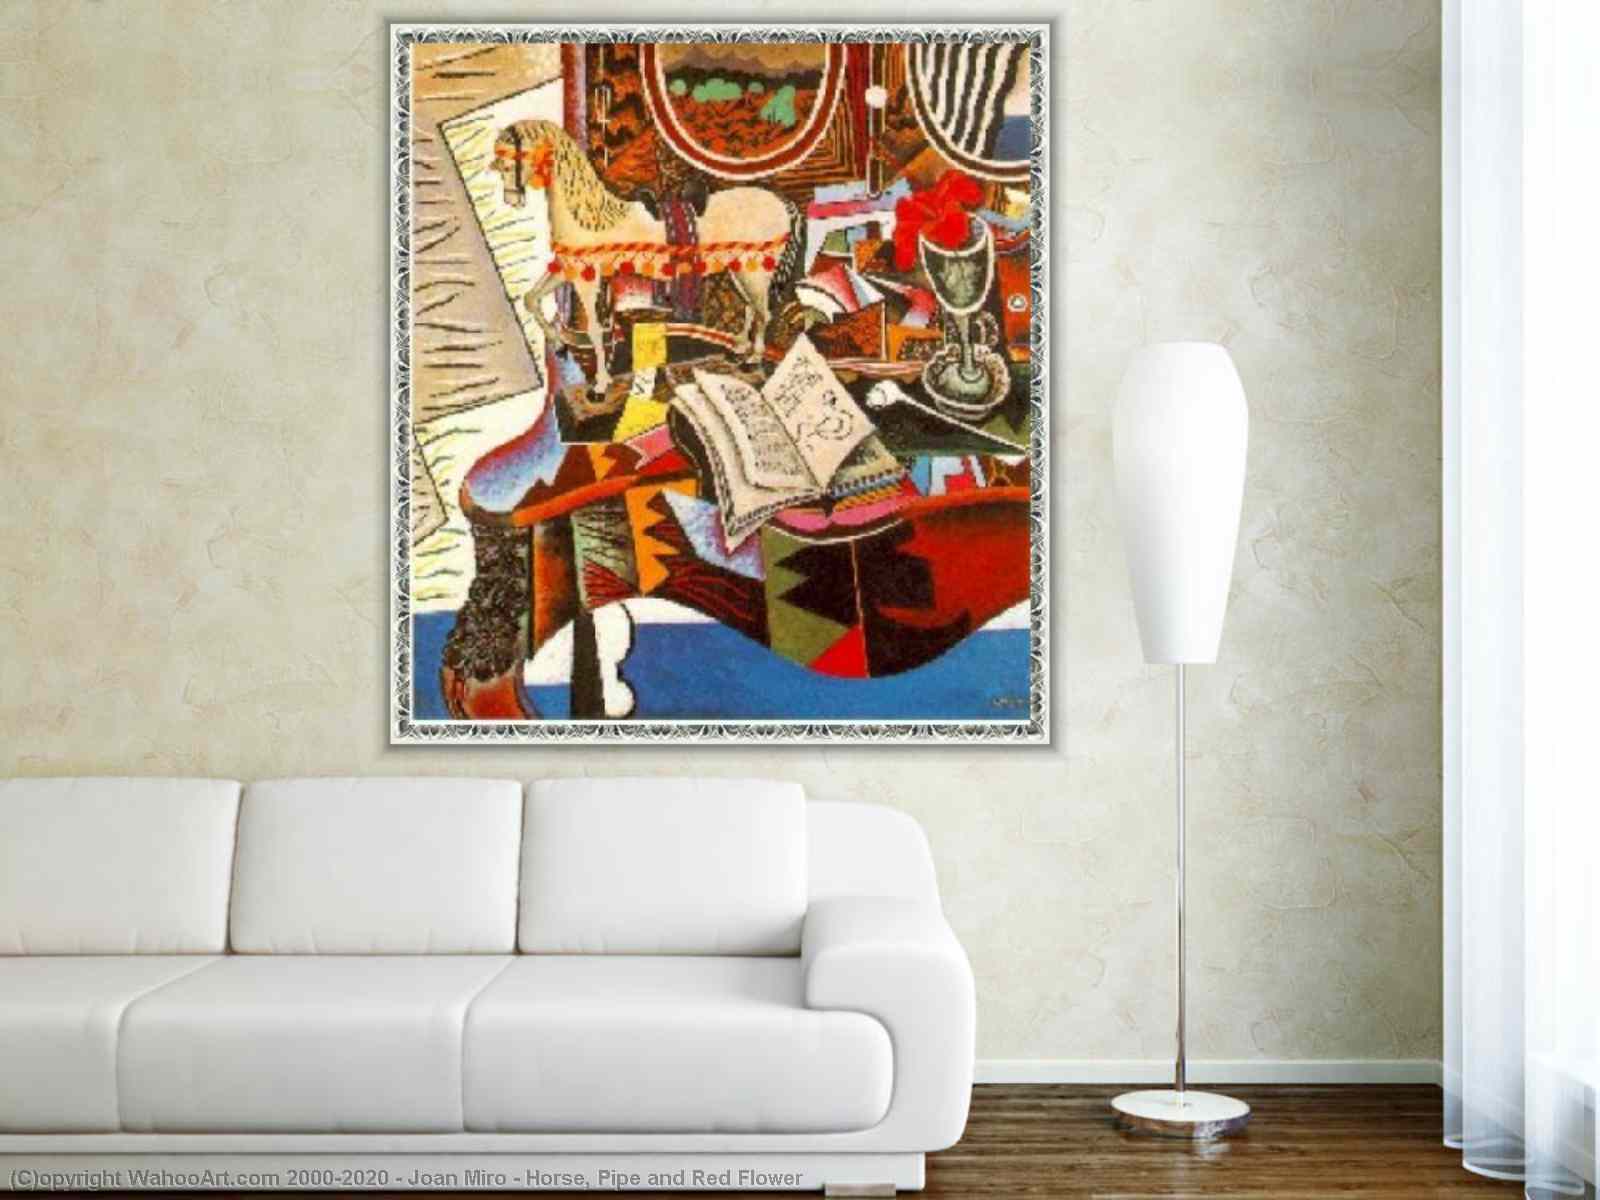 Horse, Pipe and by Miro | Paintings Reproductions | Most-Famous-Paintings.com